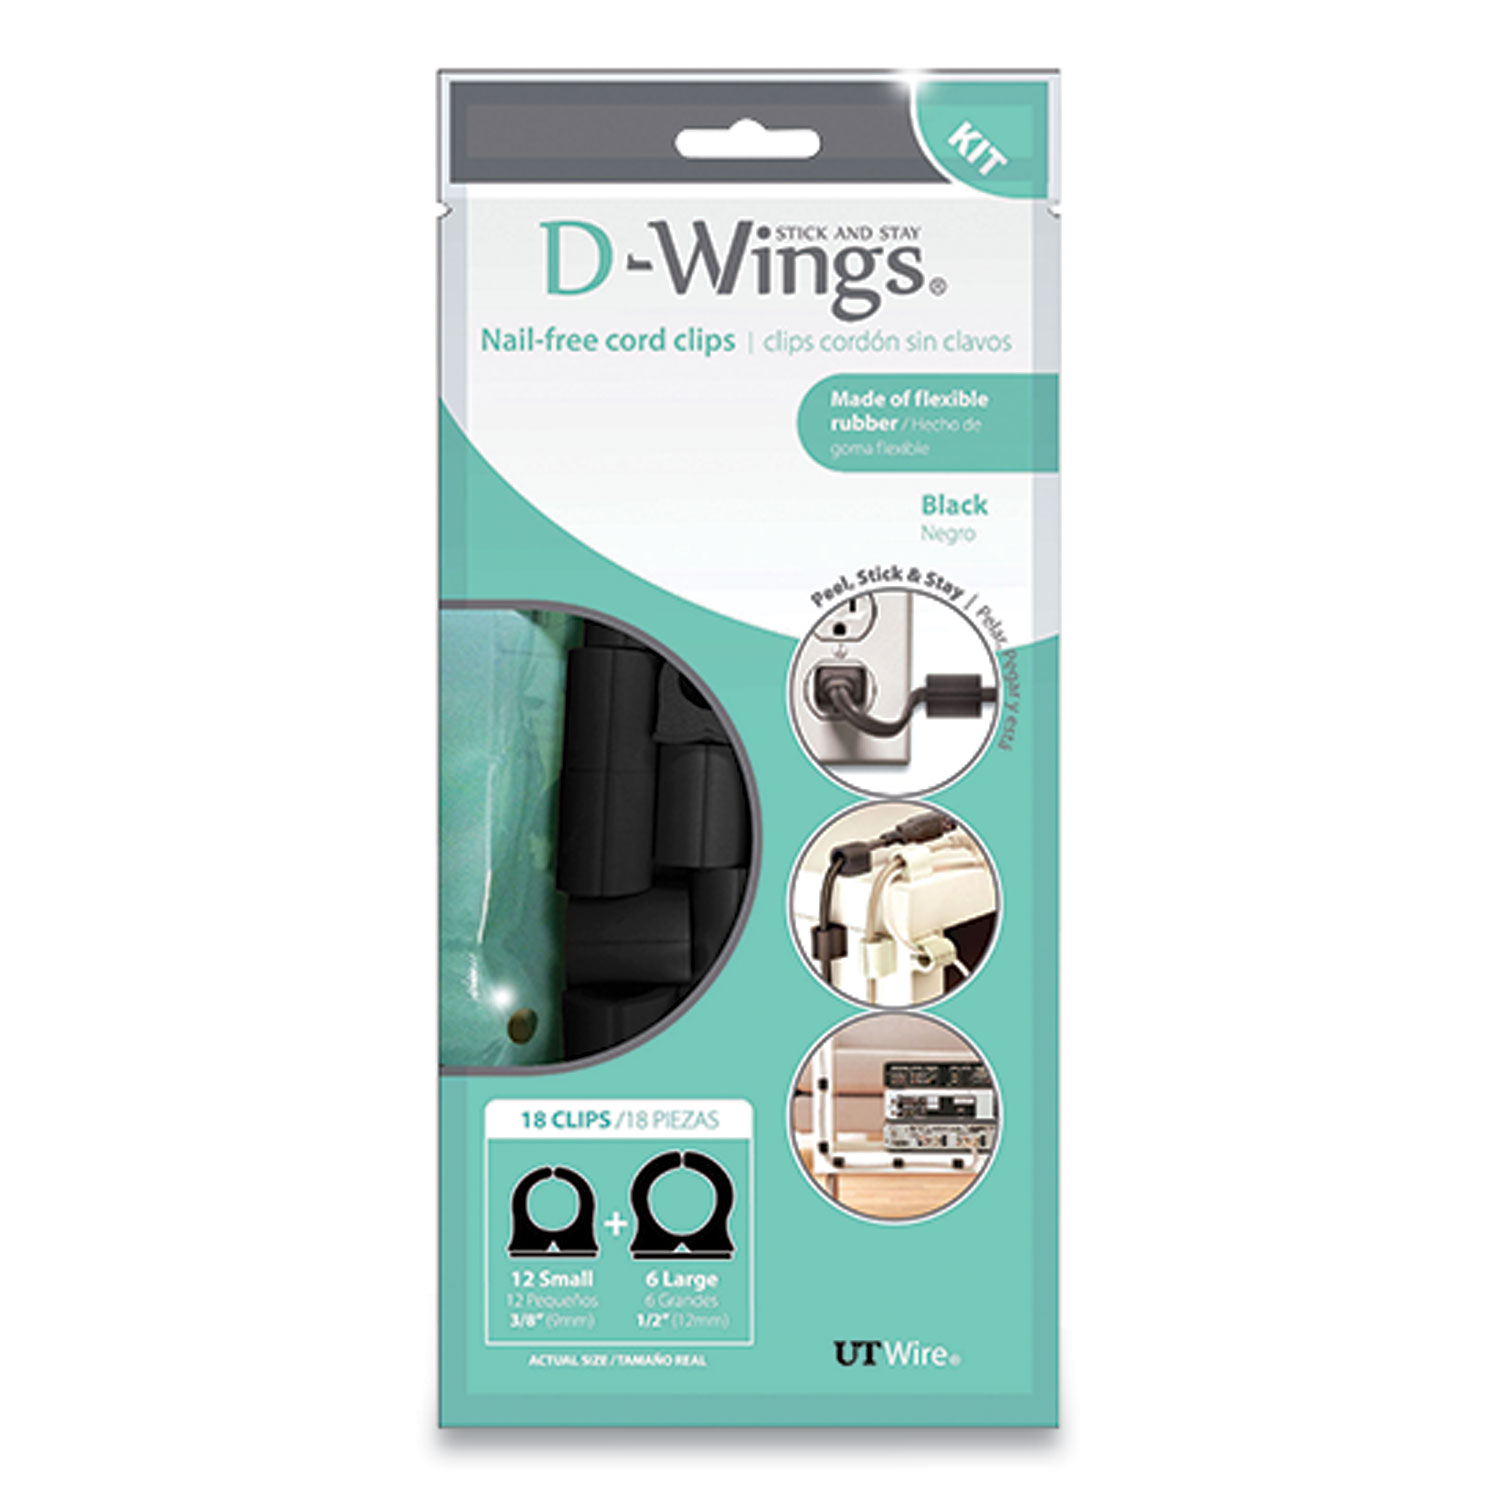  UT Wire UTW-D18-BK D-Wings Nail-Free Cord Clips, 12 Small 0.38, Six Large 0.5, Black, 18/Pack (RBO1749463) 